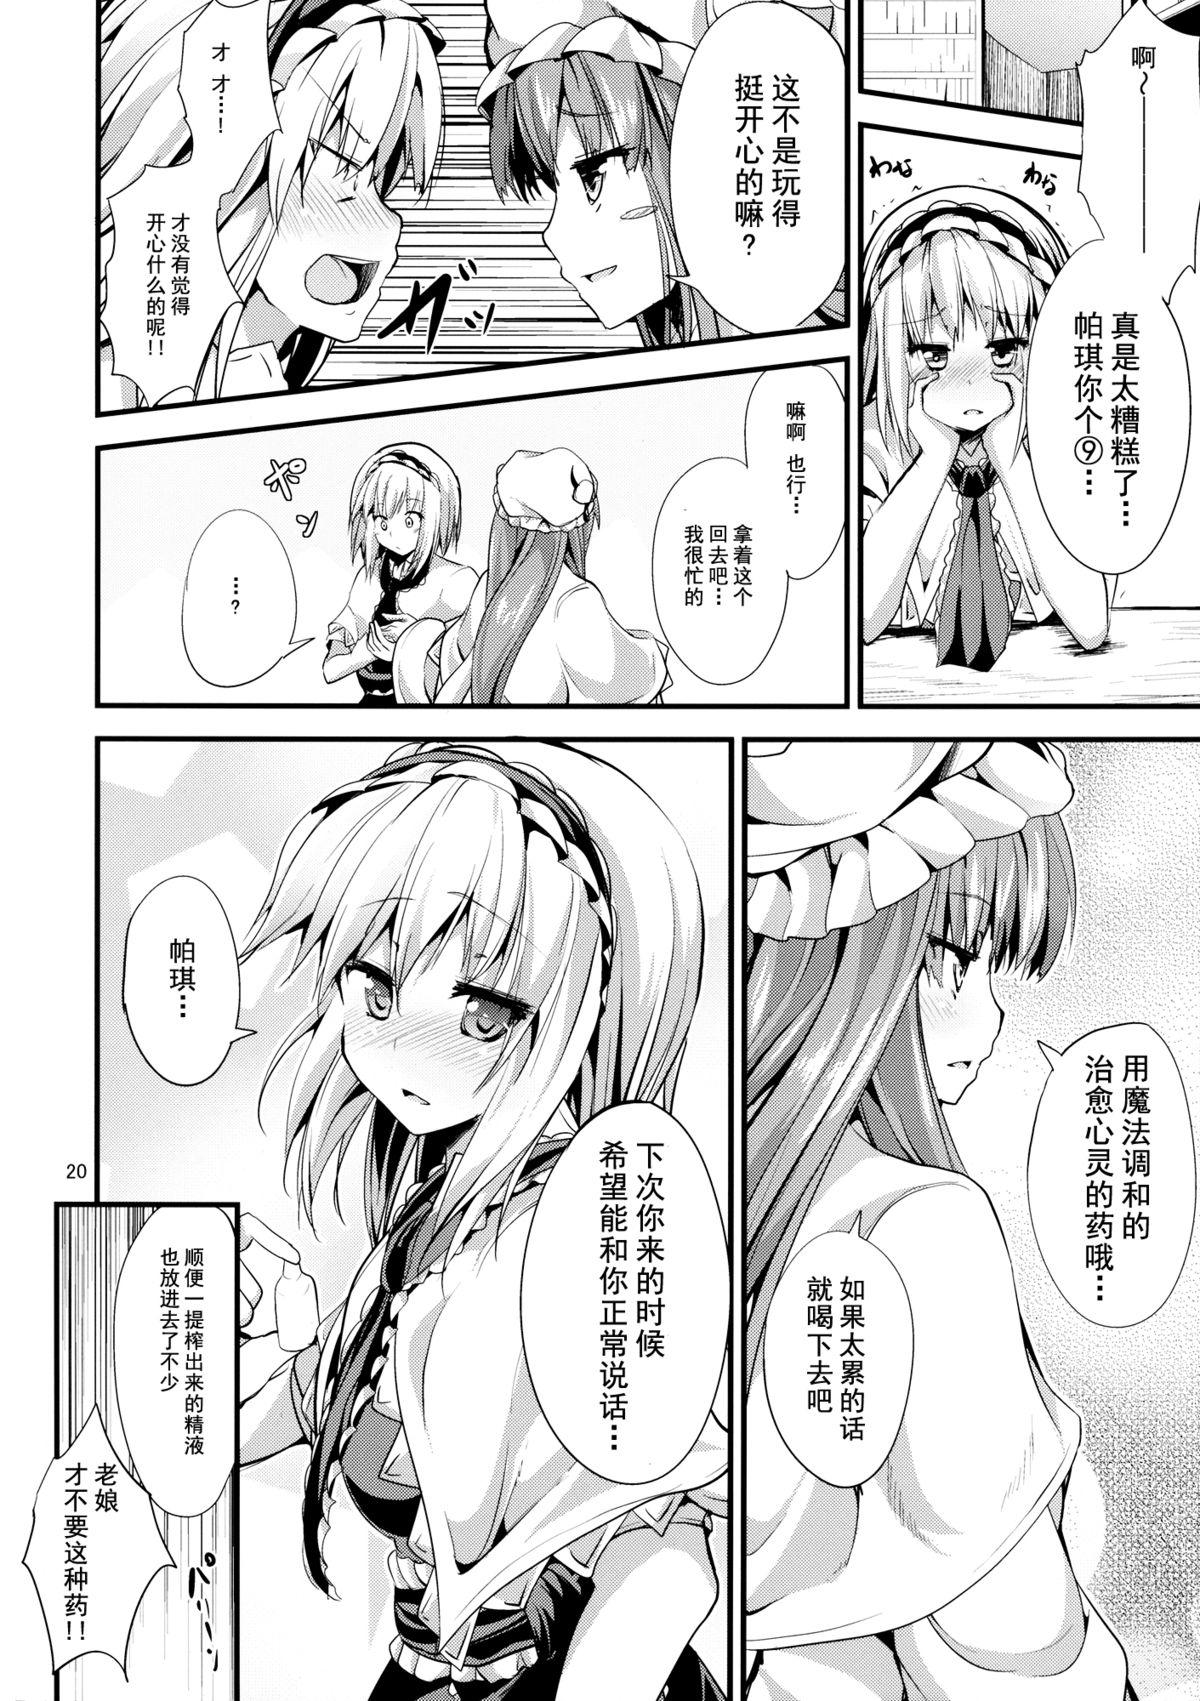 Puto (Reitaisai 11) [Water Drop (MA-SA)] The Holiday (Touhou Project)[chinese]【伞尖汉化】 - Touhou project Livecams - Page 19